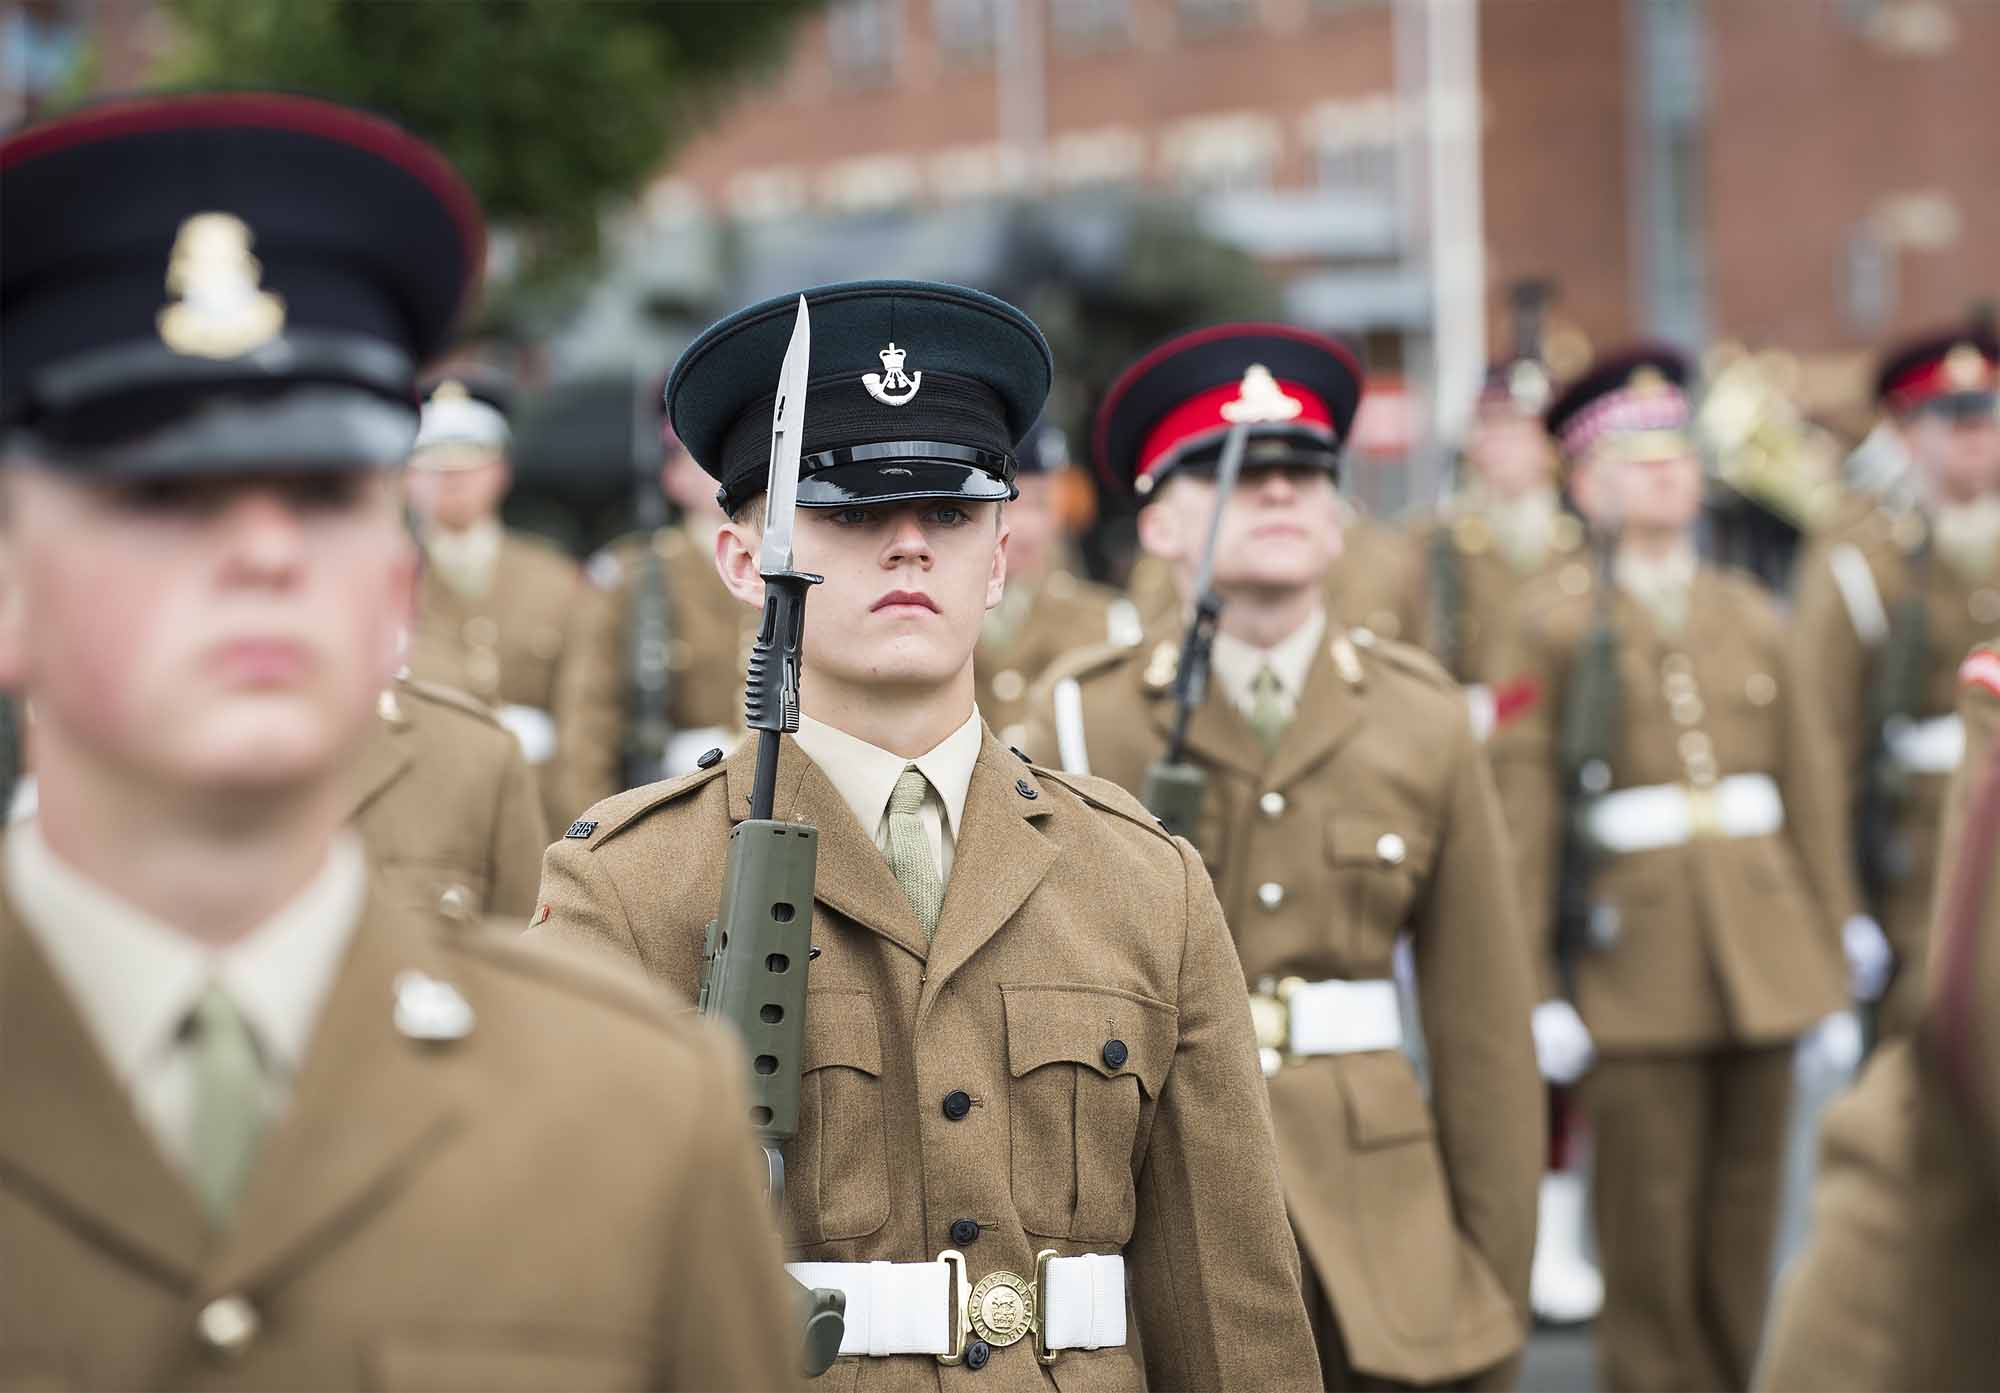 Pictured:A Junior Soldier from the Rifles during the parade. More than 600 teenagers from the Army Foundation College marched on their way to a new career when they graduated from the military training establishment in Harrogate, North Yorkshire. The college in Penny Pot Lane, Harrogate runs two types of course – a 40-week long course and a shorter 20-week course to train 16-17 year olds for a wide variety of Army careers. NOTE TO DESKS:  MoD release authorised handout images.  All images remain Crown Copyright 2016.  Photo credit to read -Sgt Jamie Peters RLC (Phot) Email: jamiepeters@mediaops.army.mod.uk richardwatt@mediaops.army.mod.uk shanewilkinson@mediaops.army.mod.uk Richard Watt - 07836 515306 Shane Wilkinson - 07901 590723